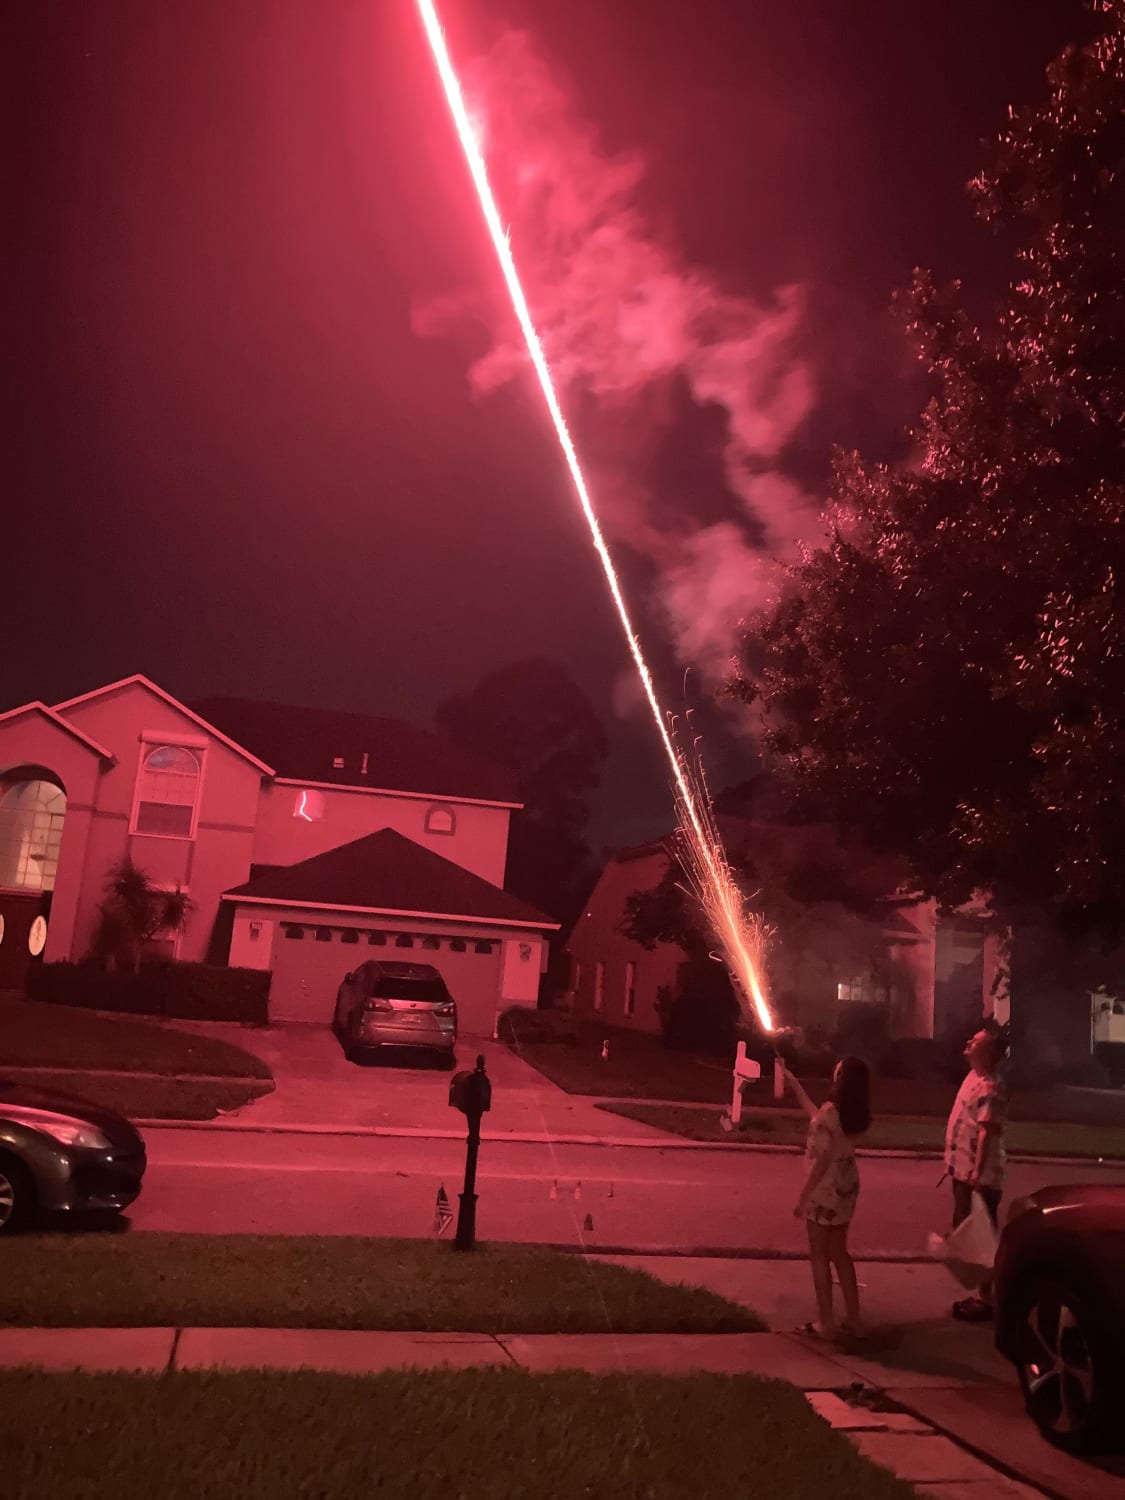 Perfectly timed roman candle shot